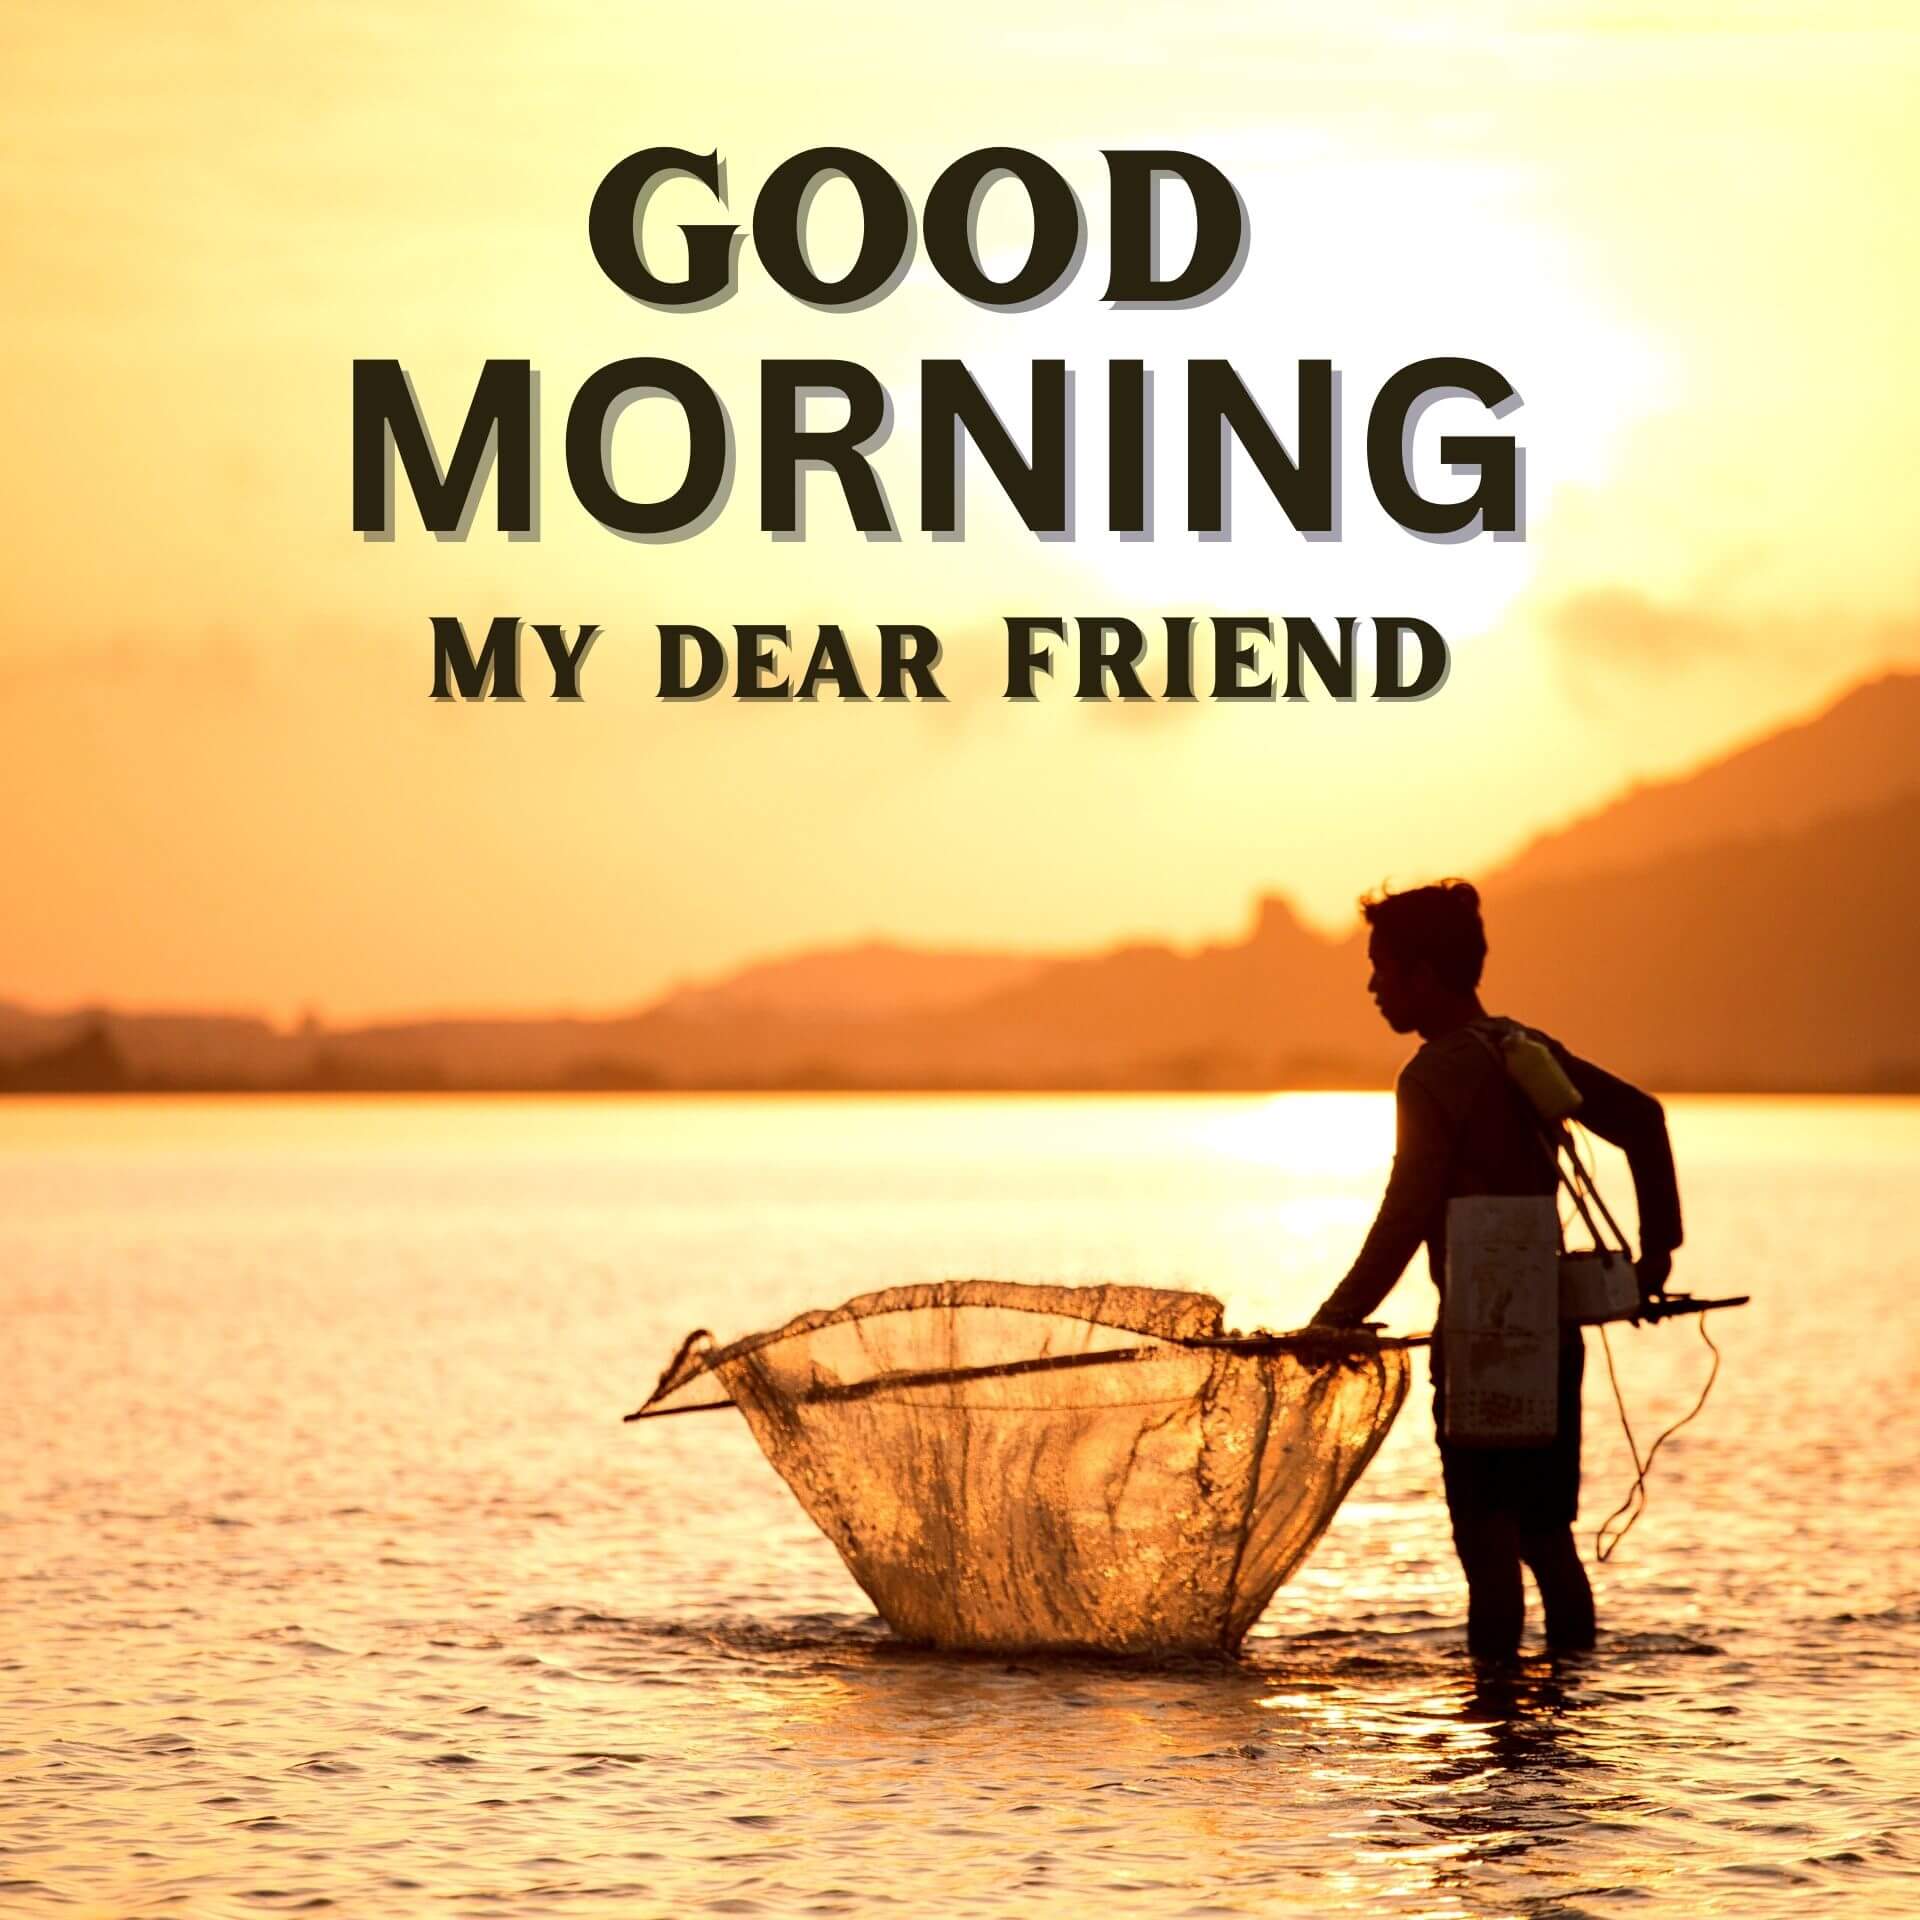 Download Latest Good Morning Images Download